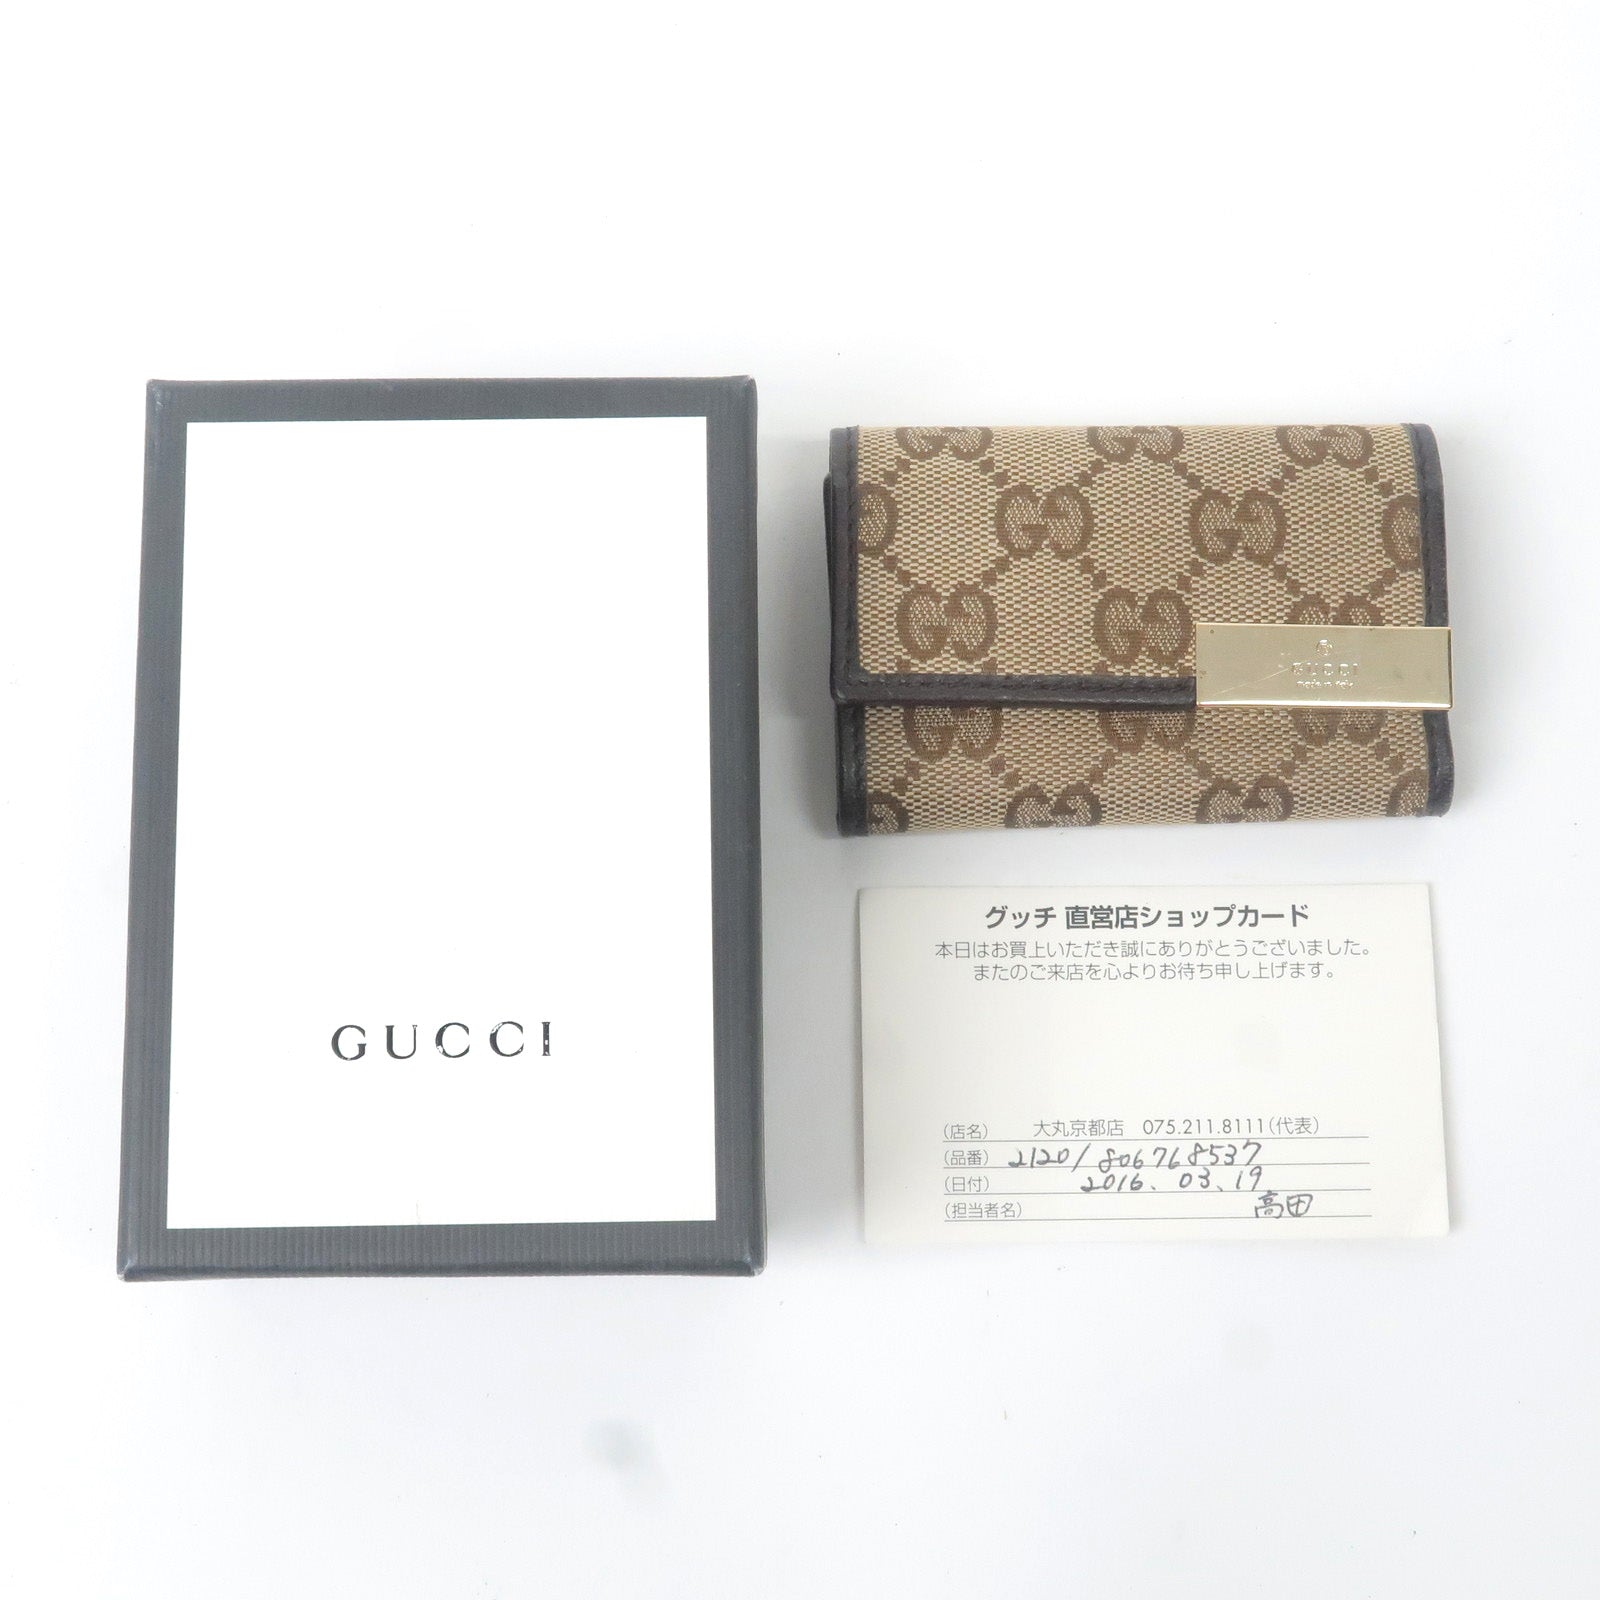 Authenticated Used GUCCI Gucci GG Marmont Key Case 033 0416 0897 Calf  Leather Camel Series Gold Hardware 6 Rows 